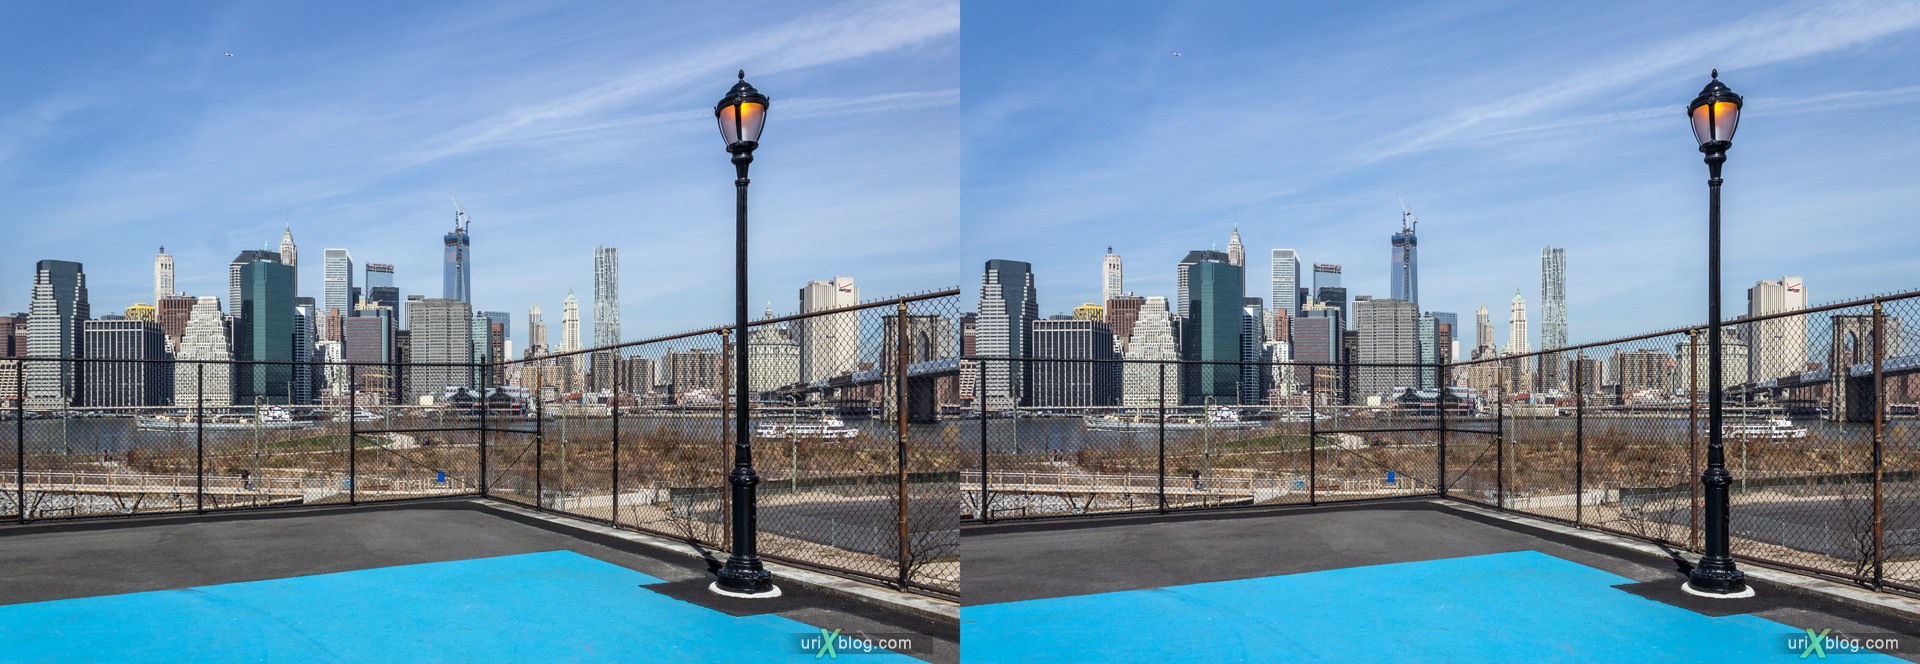 2013, Squibb park, Brooklyn, NYC, New York City, USA, 3D, stereo pair, cross-eyed, crossview, cross view stereo pair, stereoscopic